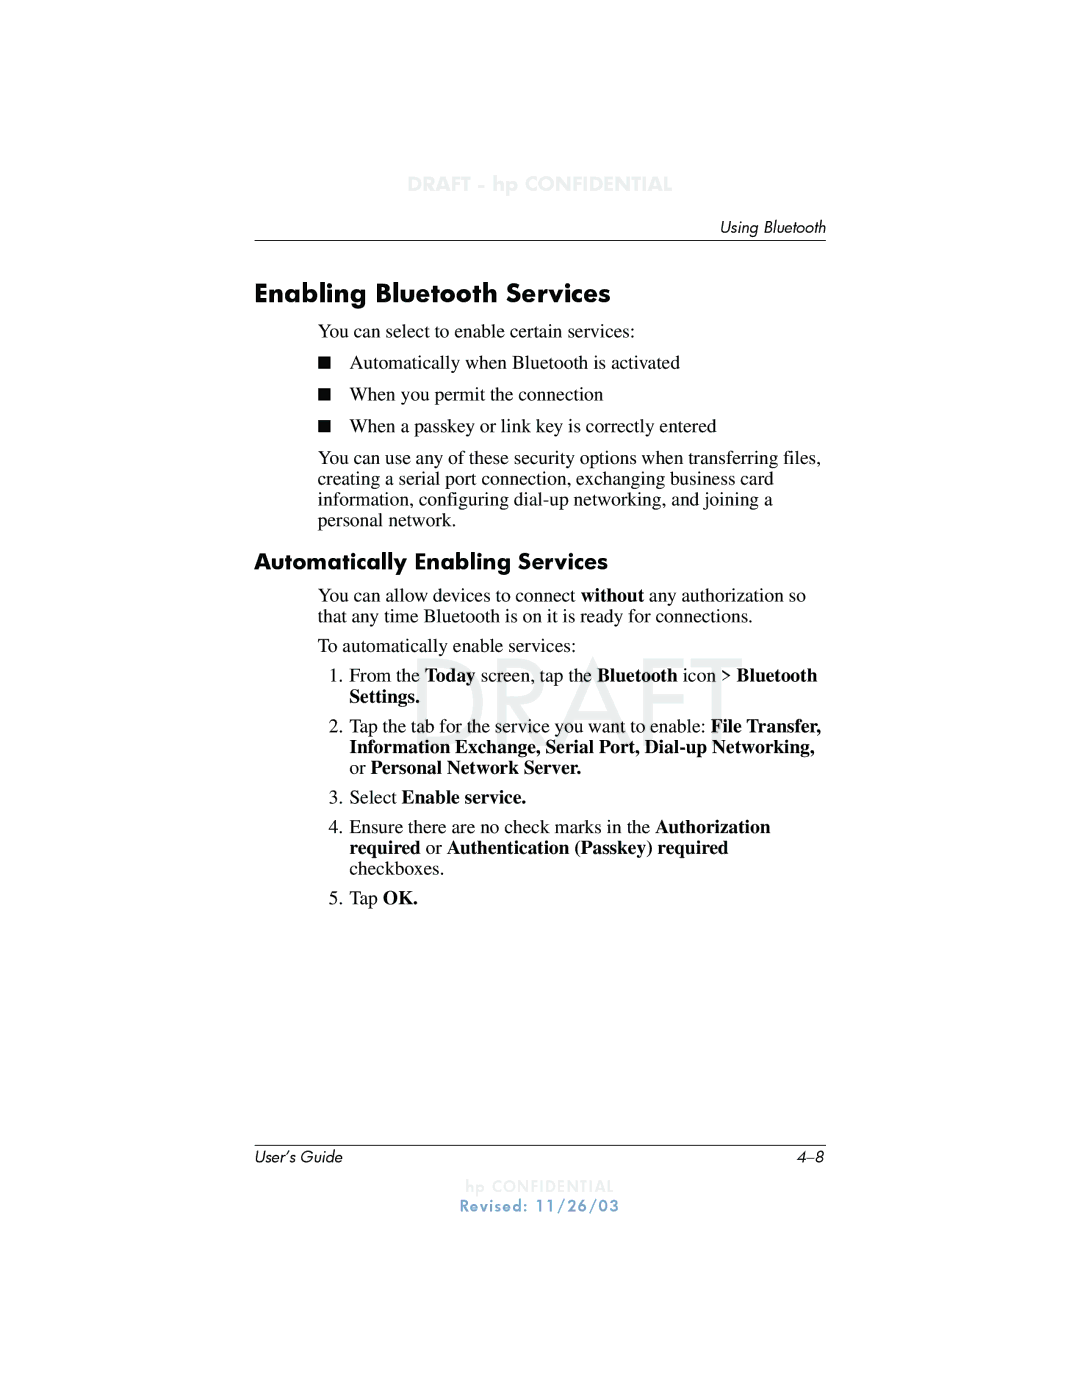 HP h6300 manual Enabling Bluetooth Services, Automatically Enabling Services 